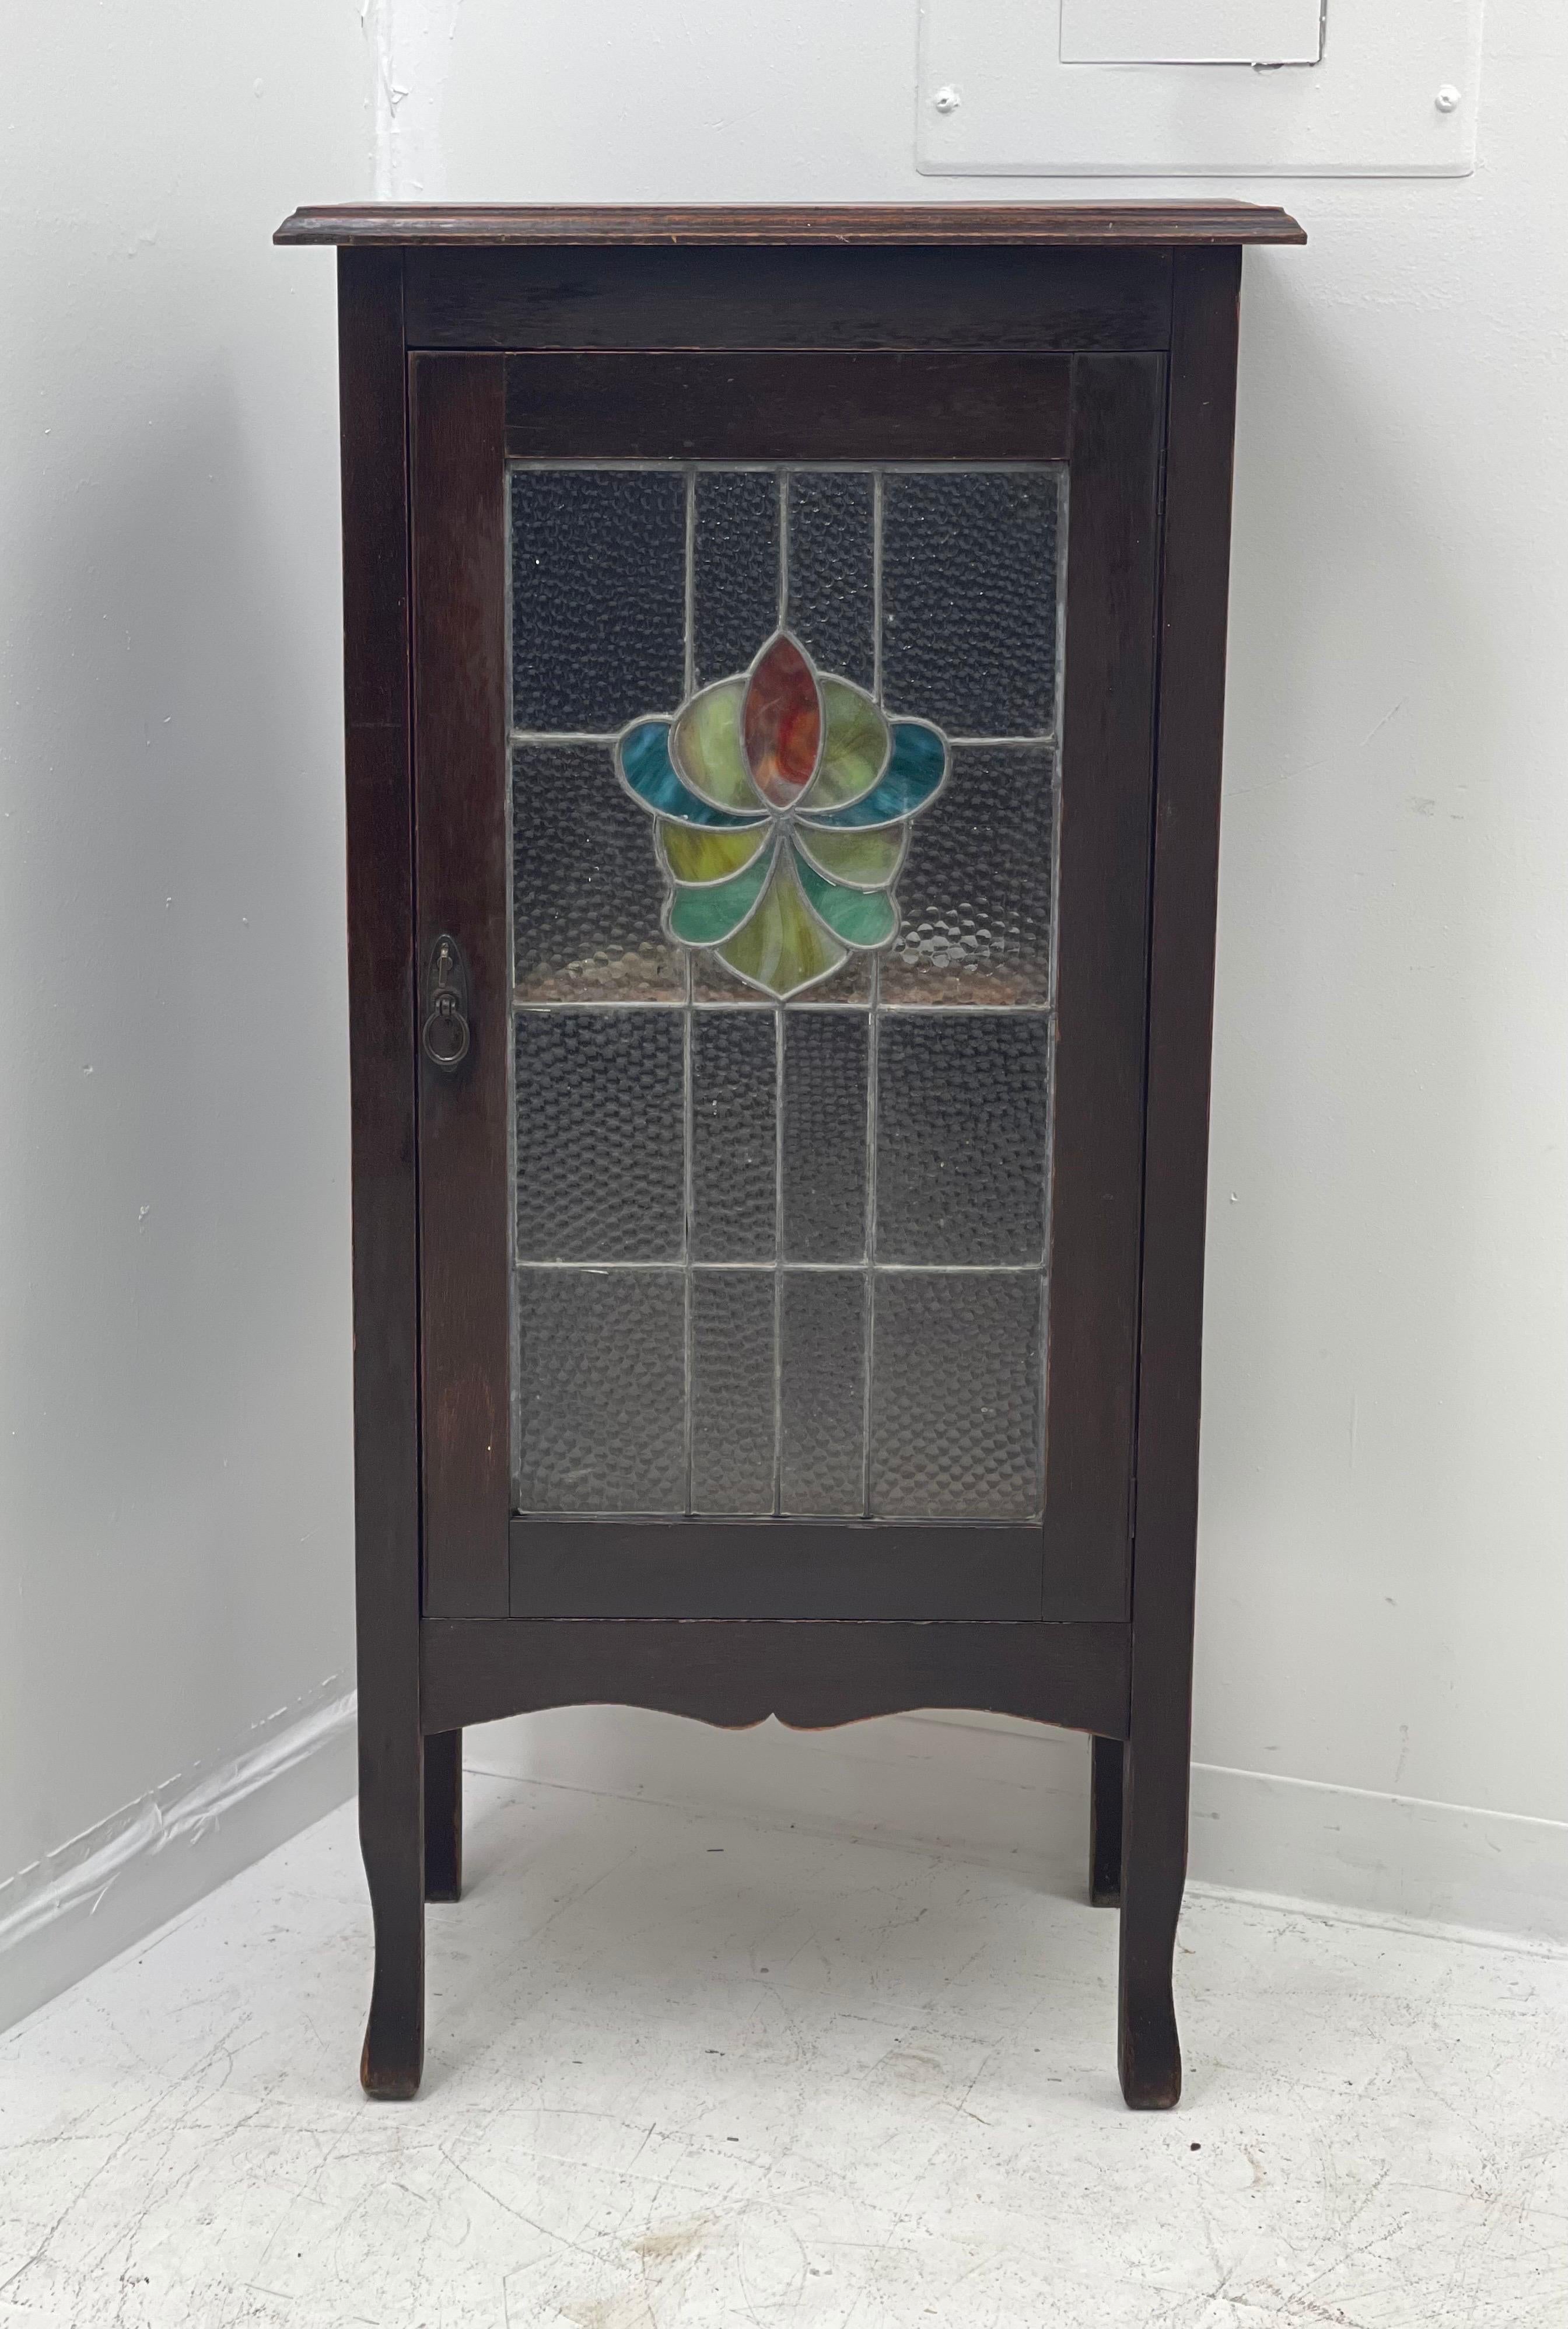 Antique English walnut storage cabinet or entryway bookcase shelf stand with original stained glass.